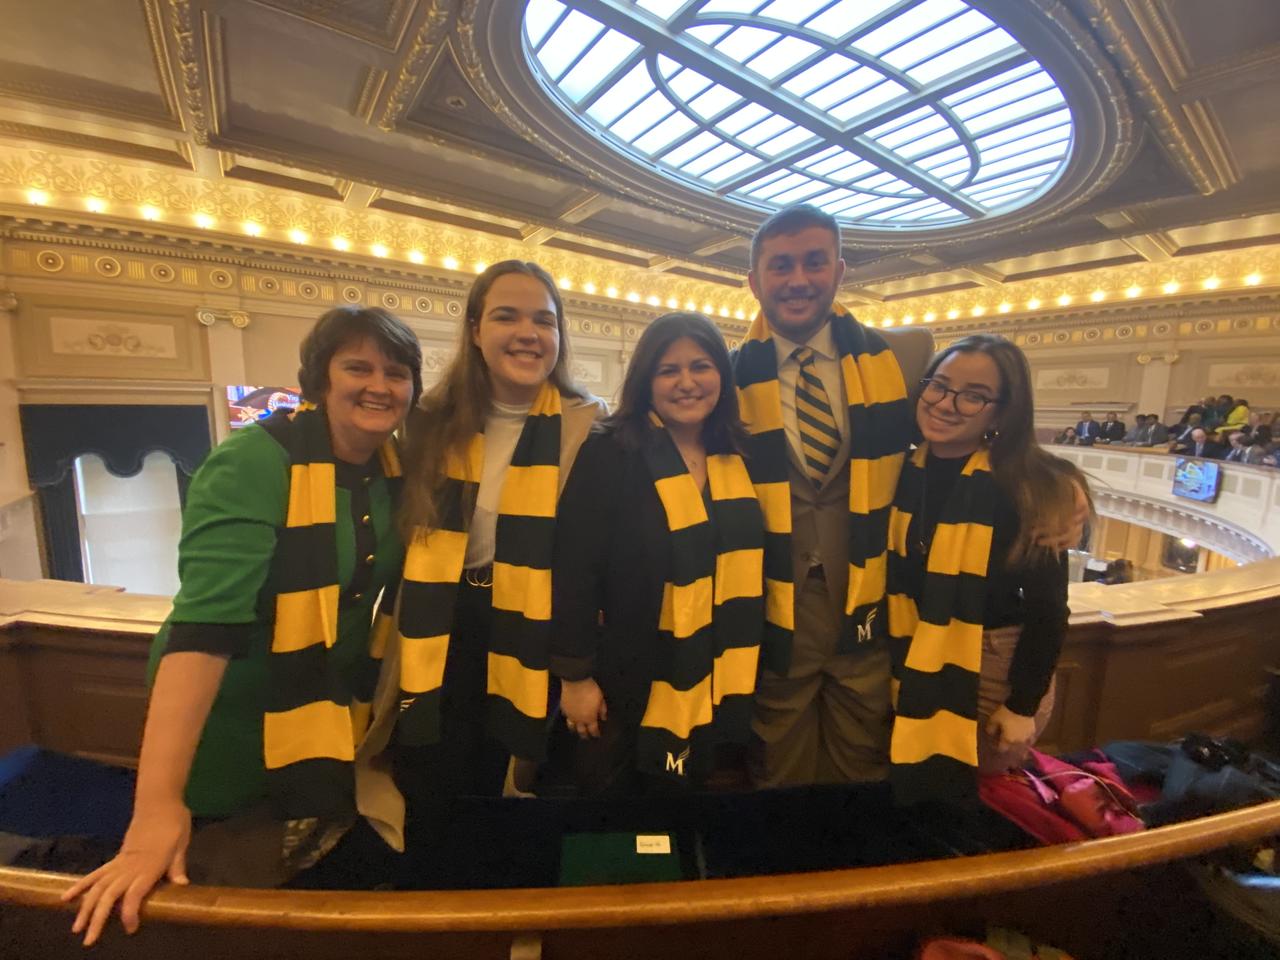 Then interim Mason President Anne Holton poses with students at Mason Lobbies at the Virginia State Capitol in February 2020. Mason senior Cassidy Whitehurst is second from right.